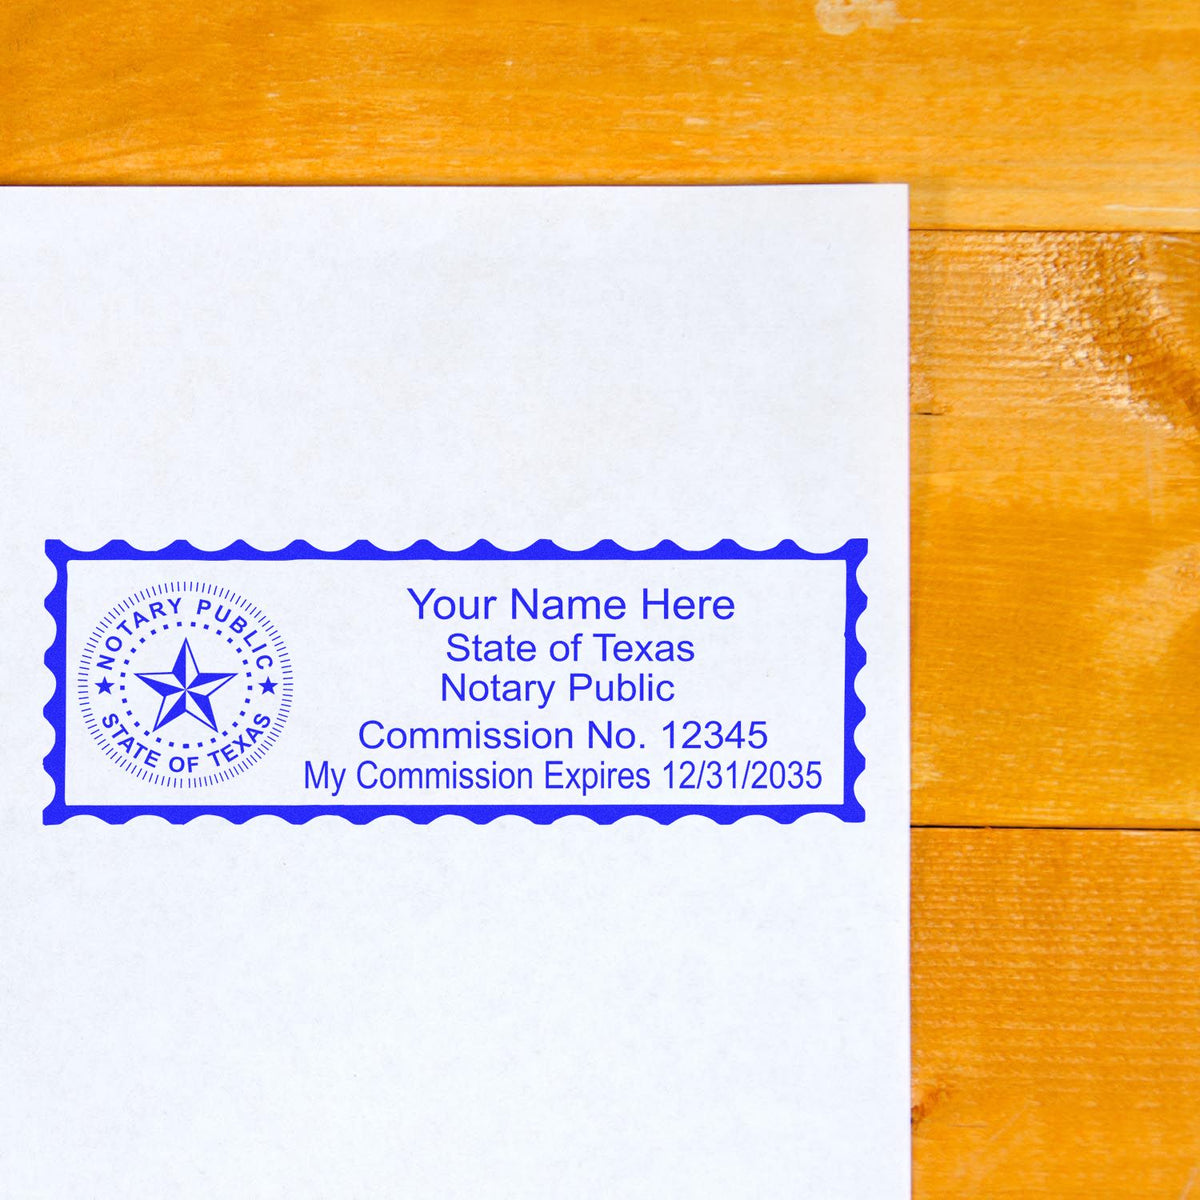 Slim Pre-Inked State Seal Notary Stamp for Texas in use photo showing a stamped imprint of the Slim Pre-Inked State Seal Notary Stamp for Texas